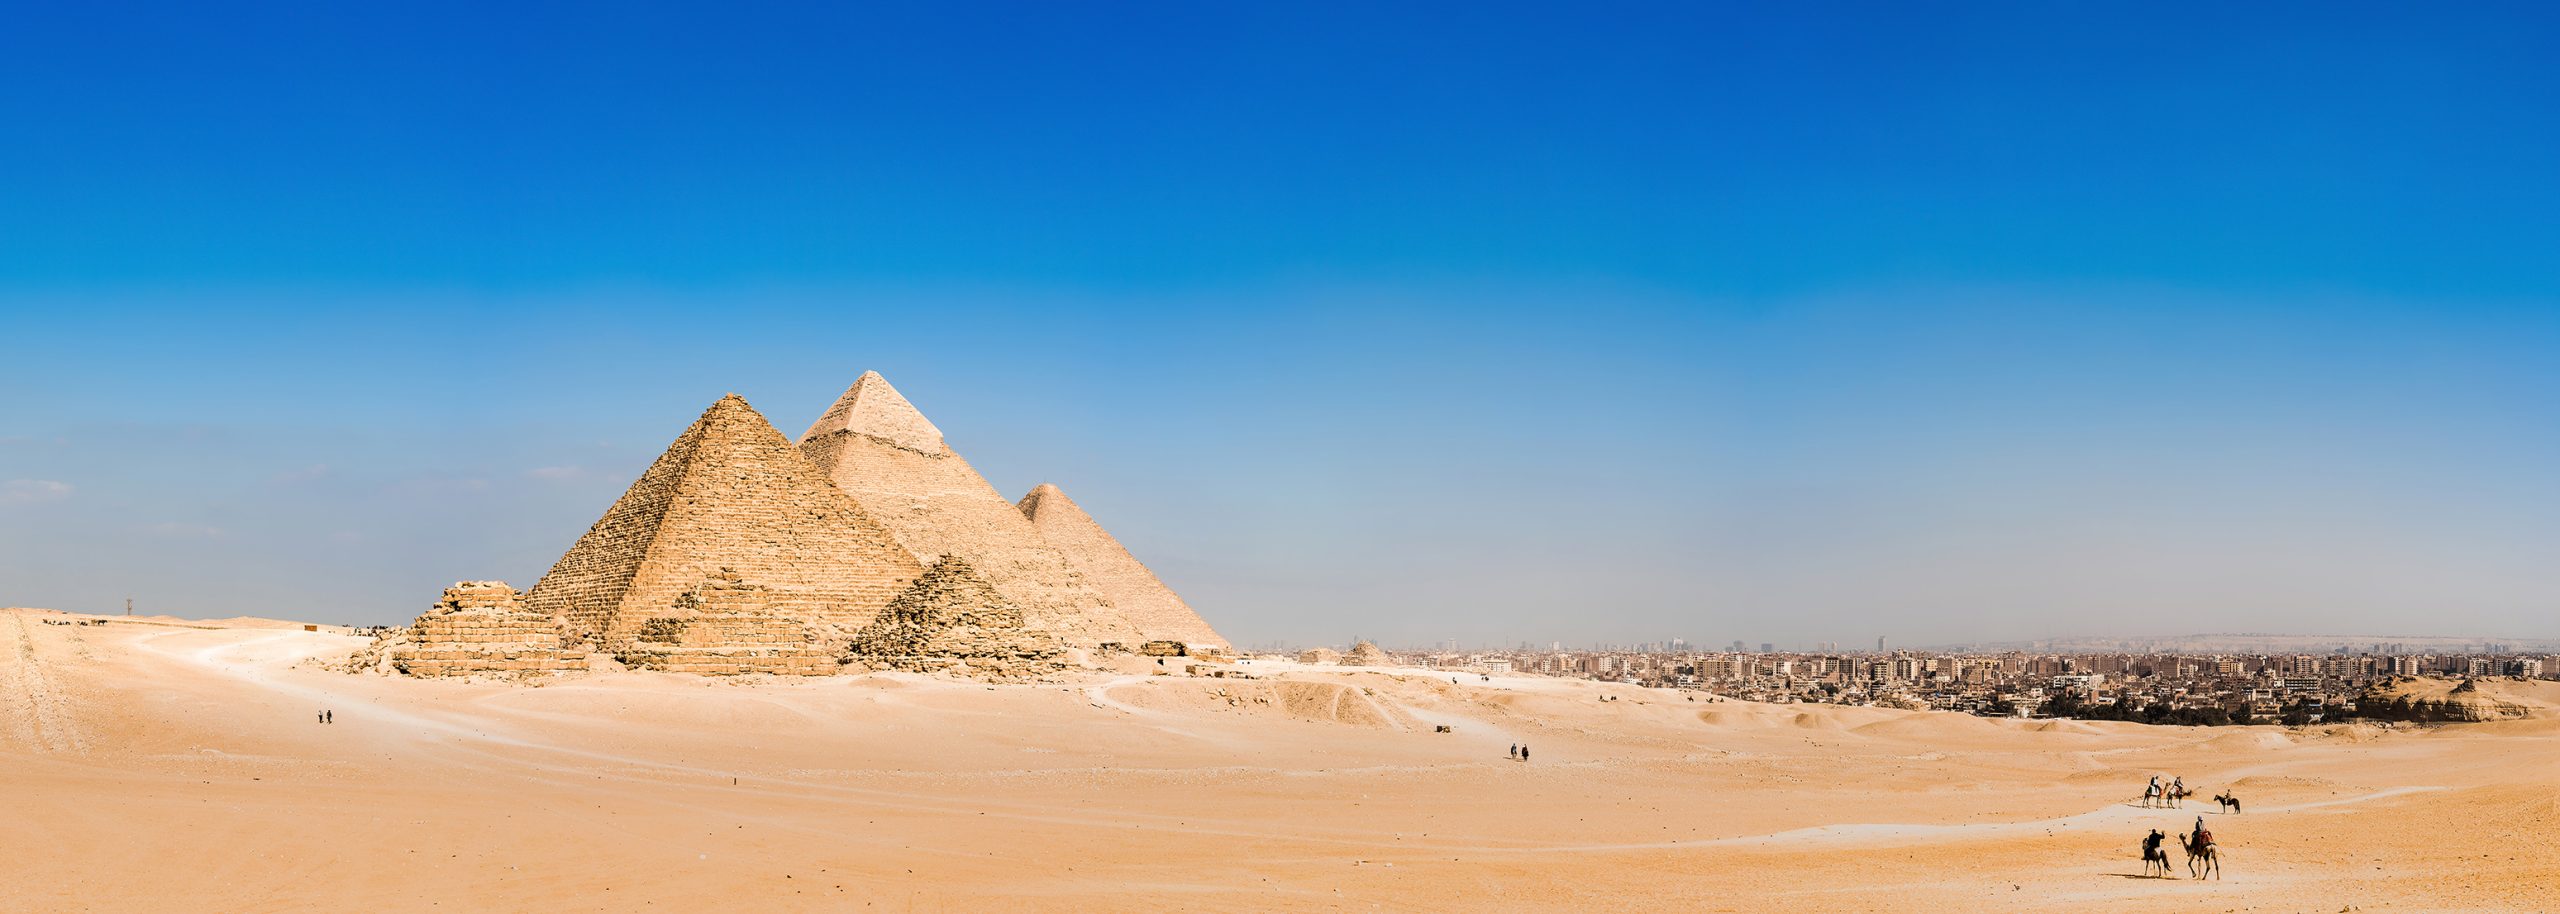 7 Colors of the Ancient World: Egyptian Blue | MyBoysen